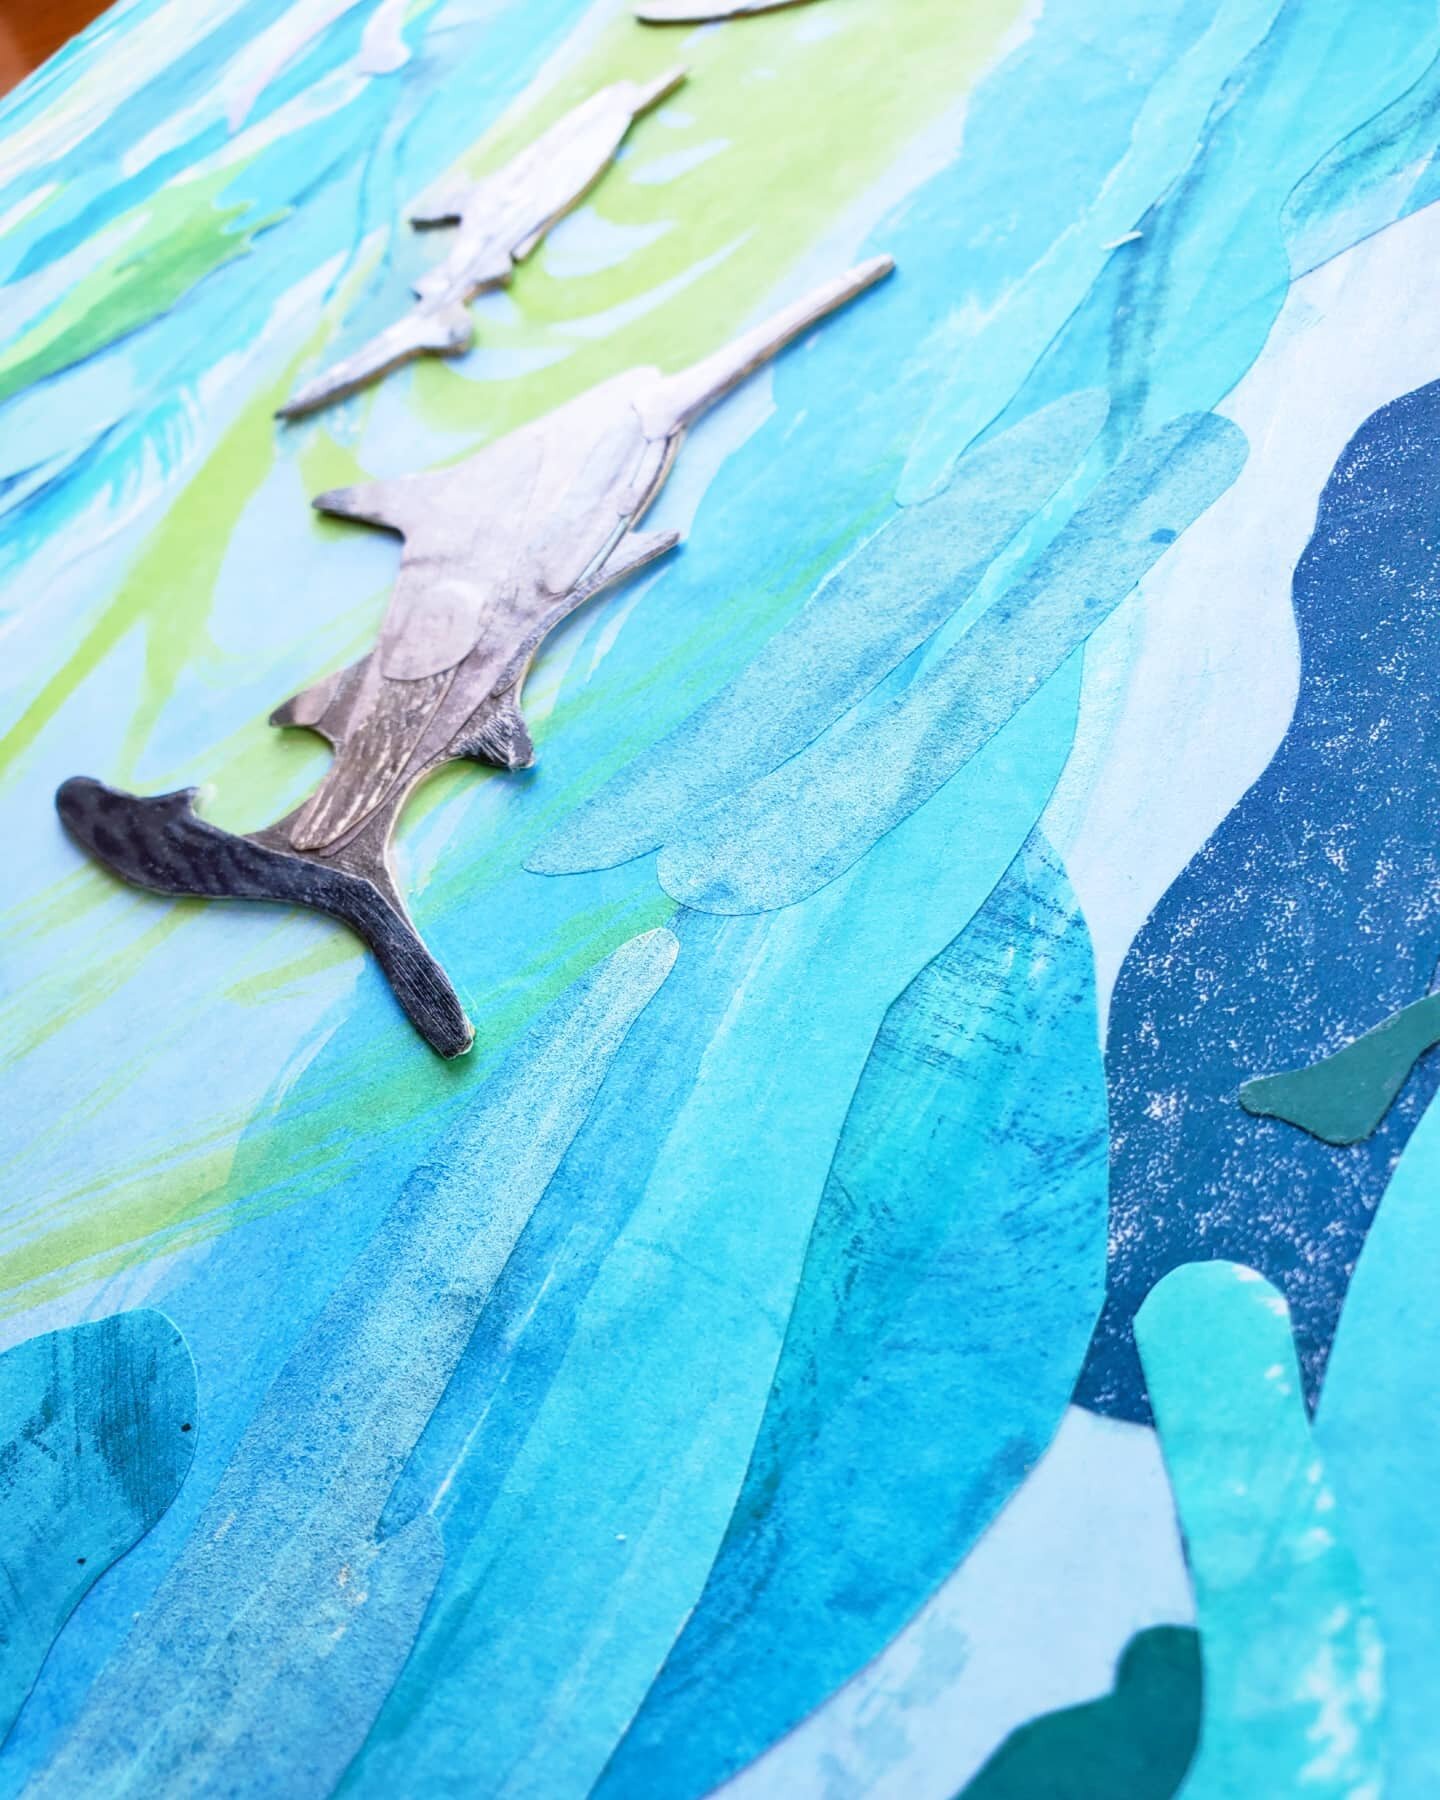 Sharkey's day! Lockdown = chance to assemble a massive glueing project that's been in parts in the drawer for months. A memory of snorkeling on yap with a flock of sharks (still cant believe I did it).

#oceanart #sharks #collage #watercolour #nzarti